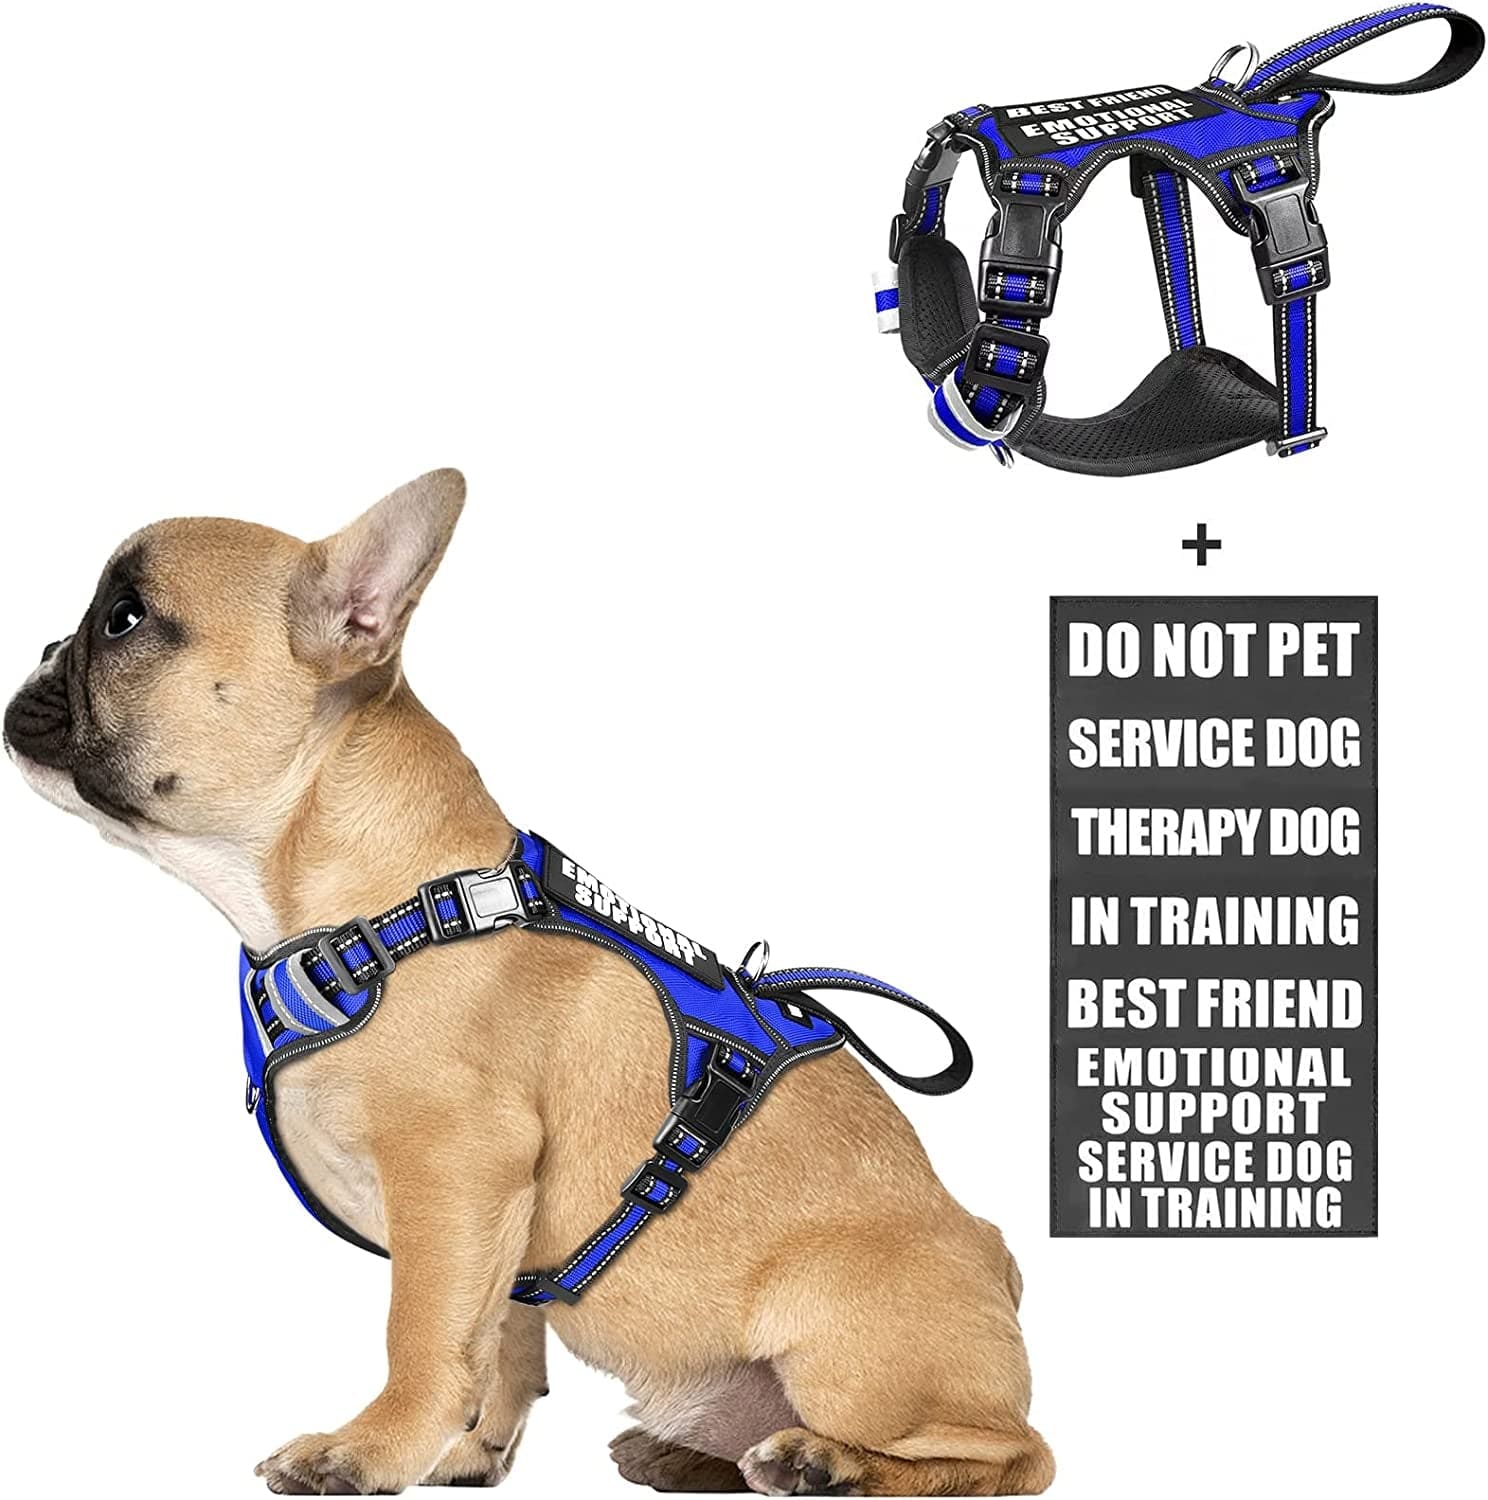  WINSEE Dog Harness No Pull, Pet Harnesses with Dog Collar,  Adjustable Reflective Oxford Outdoor Vest, Front/Back Leash Clips for  Small, Medium, Large, Extra Large Dogs, Easy Control Handle for Walking 